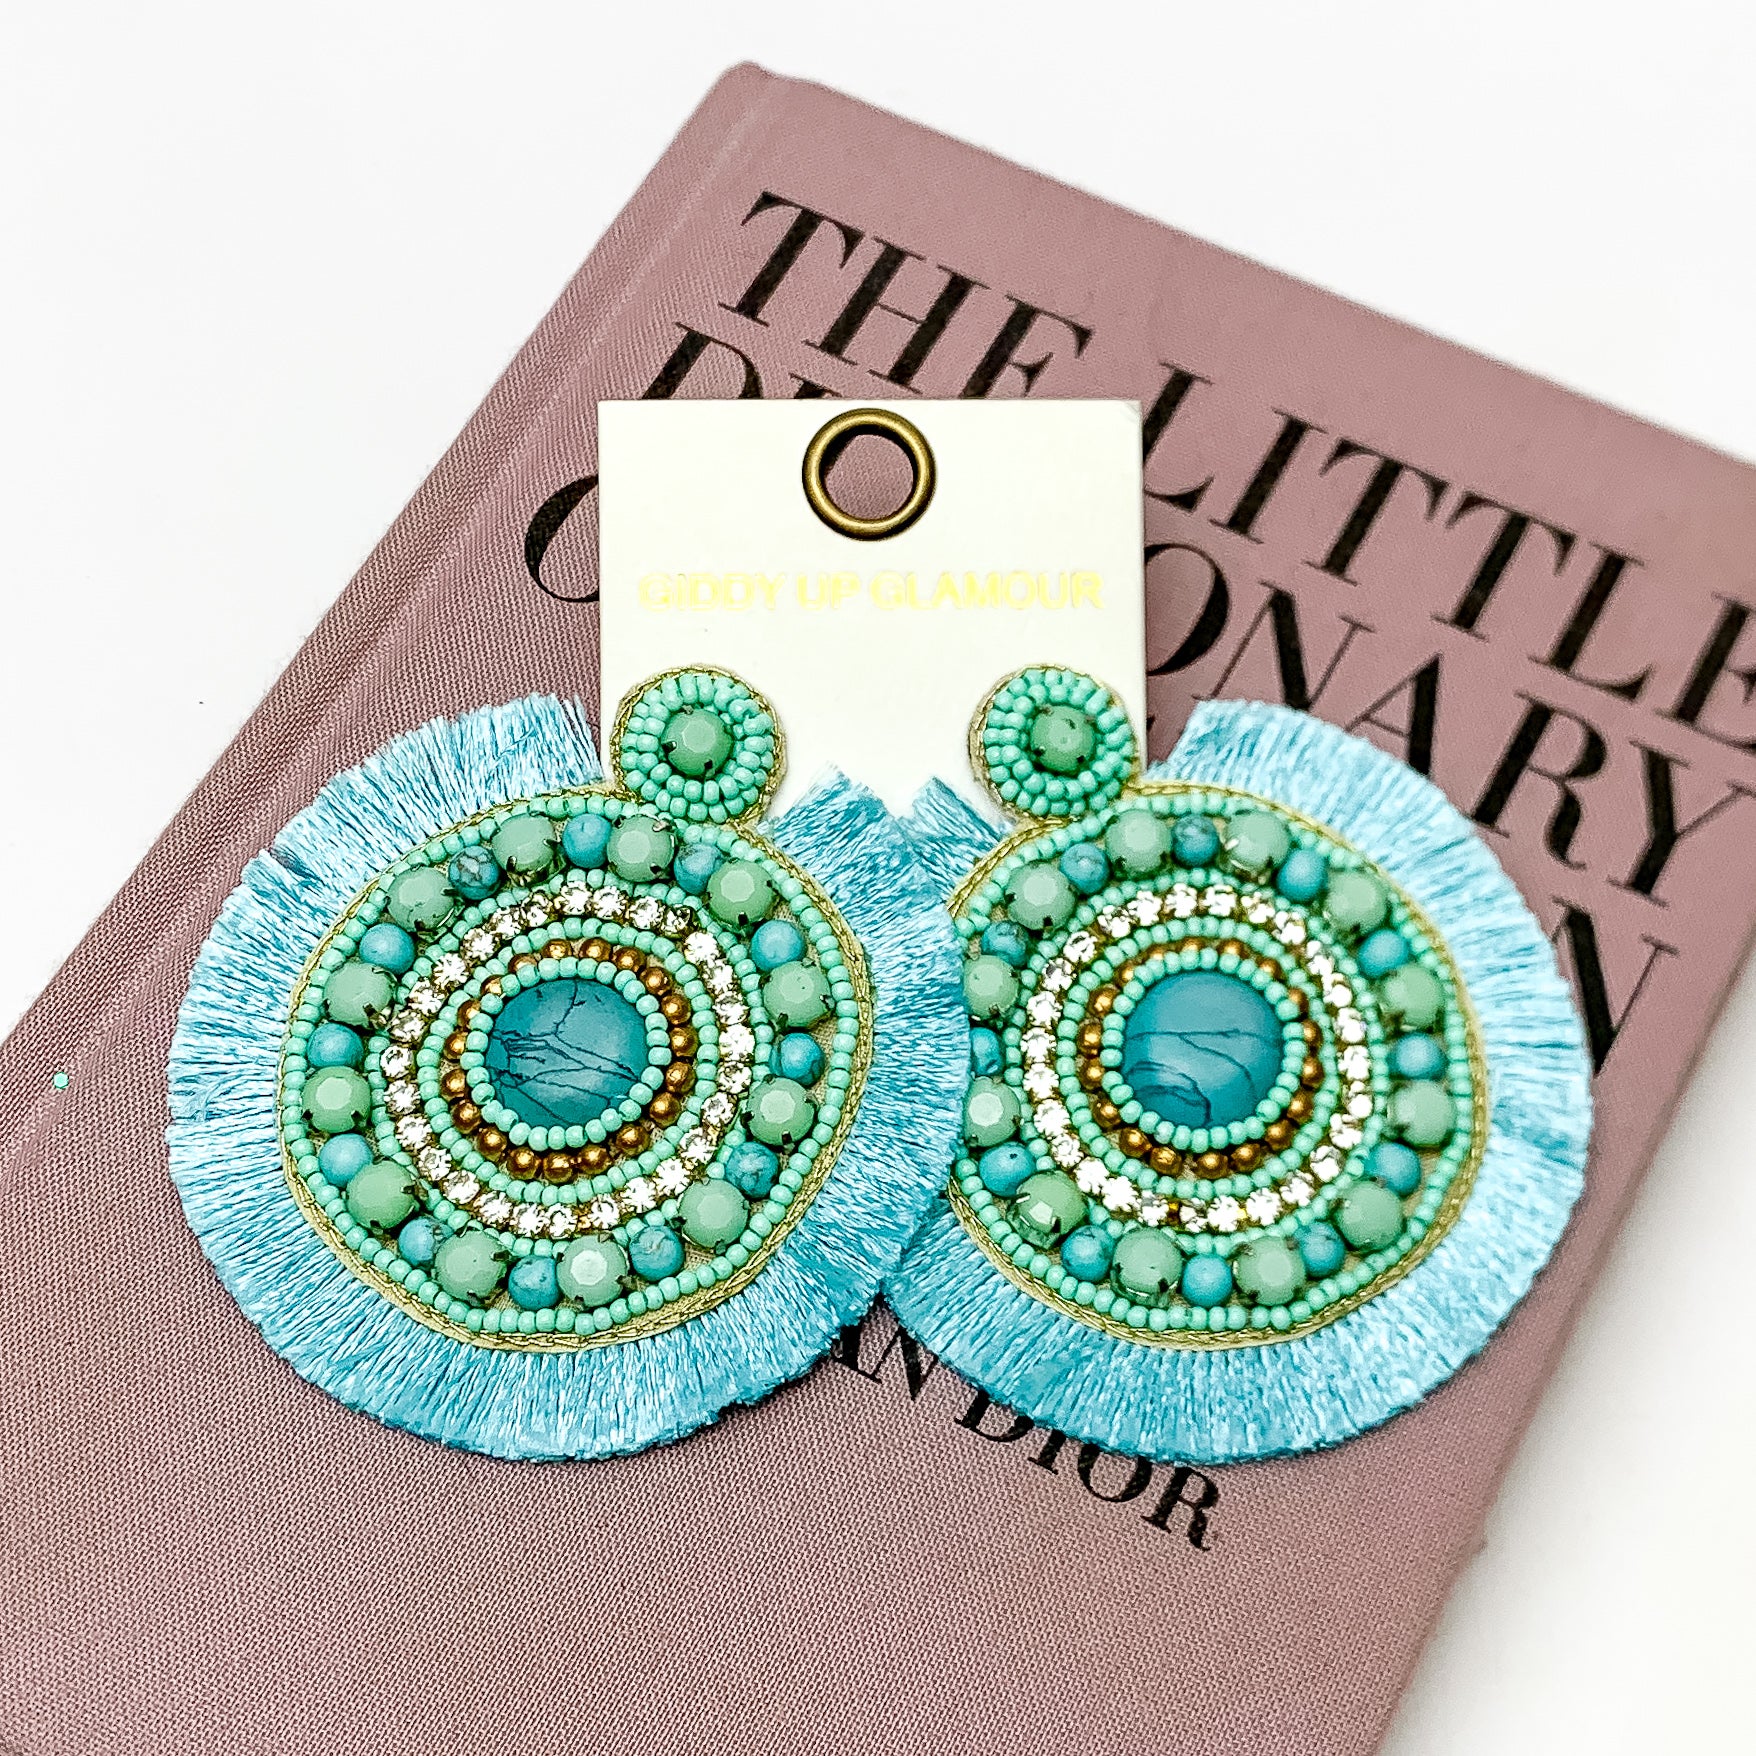 Turquoise Beaded and Crystal Statement Earrings with Fringe Outline in Turquoise Blue - Giddy Up Glamour Boutique